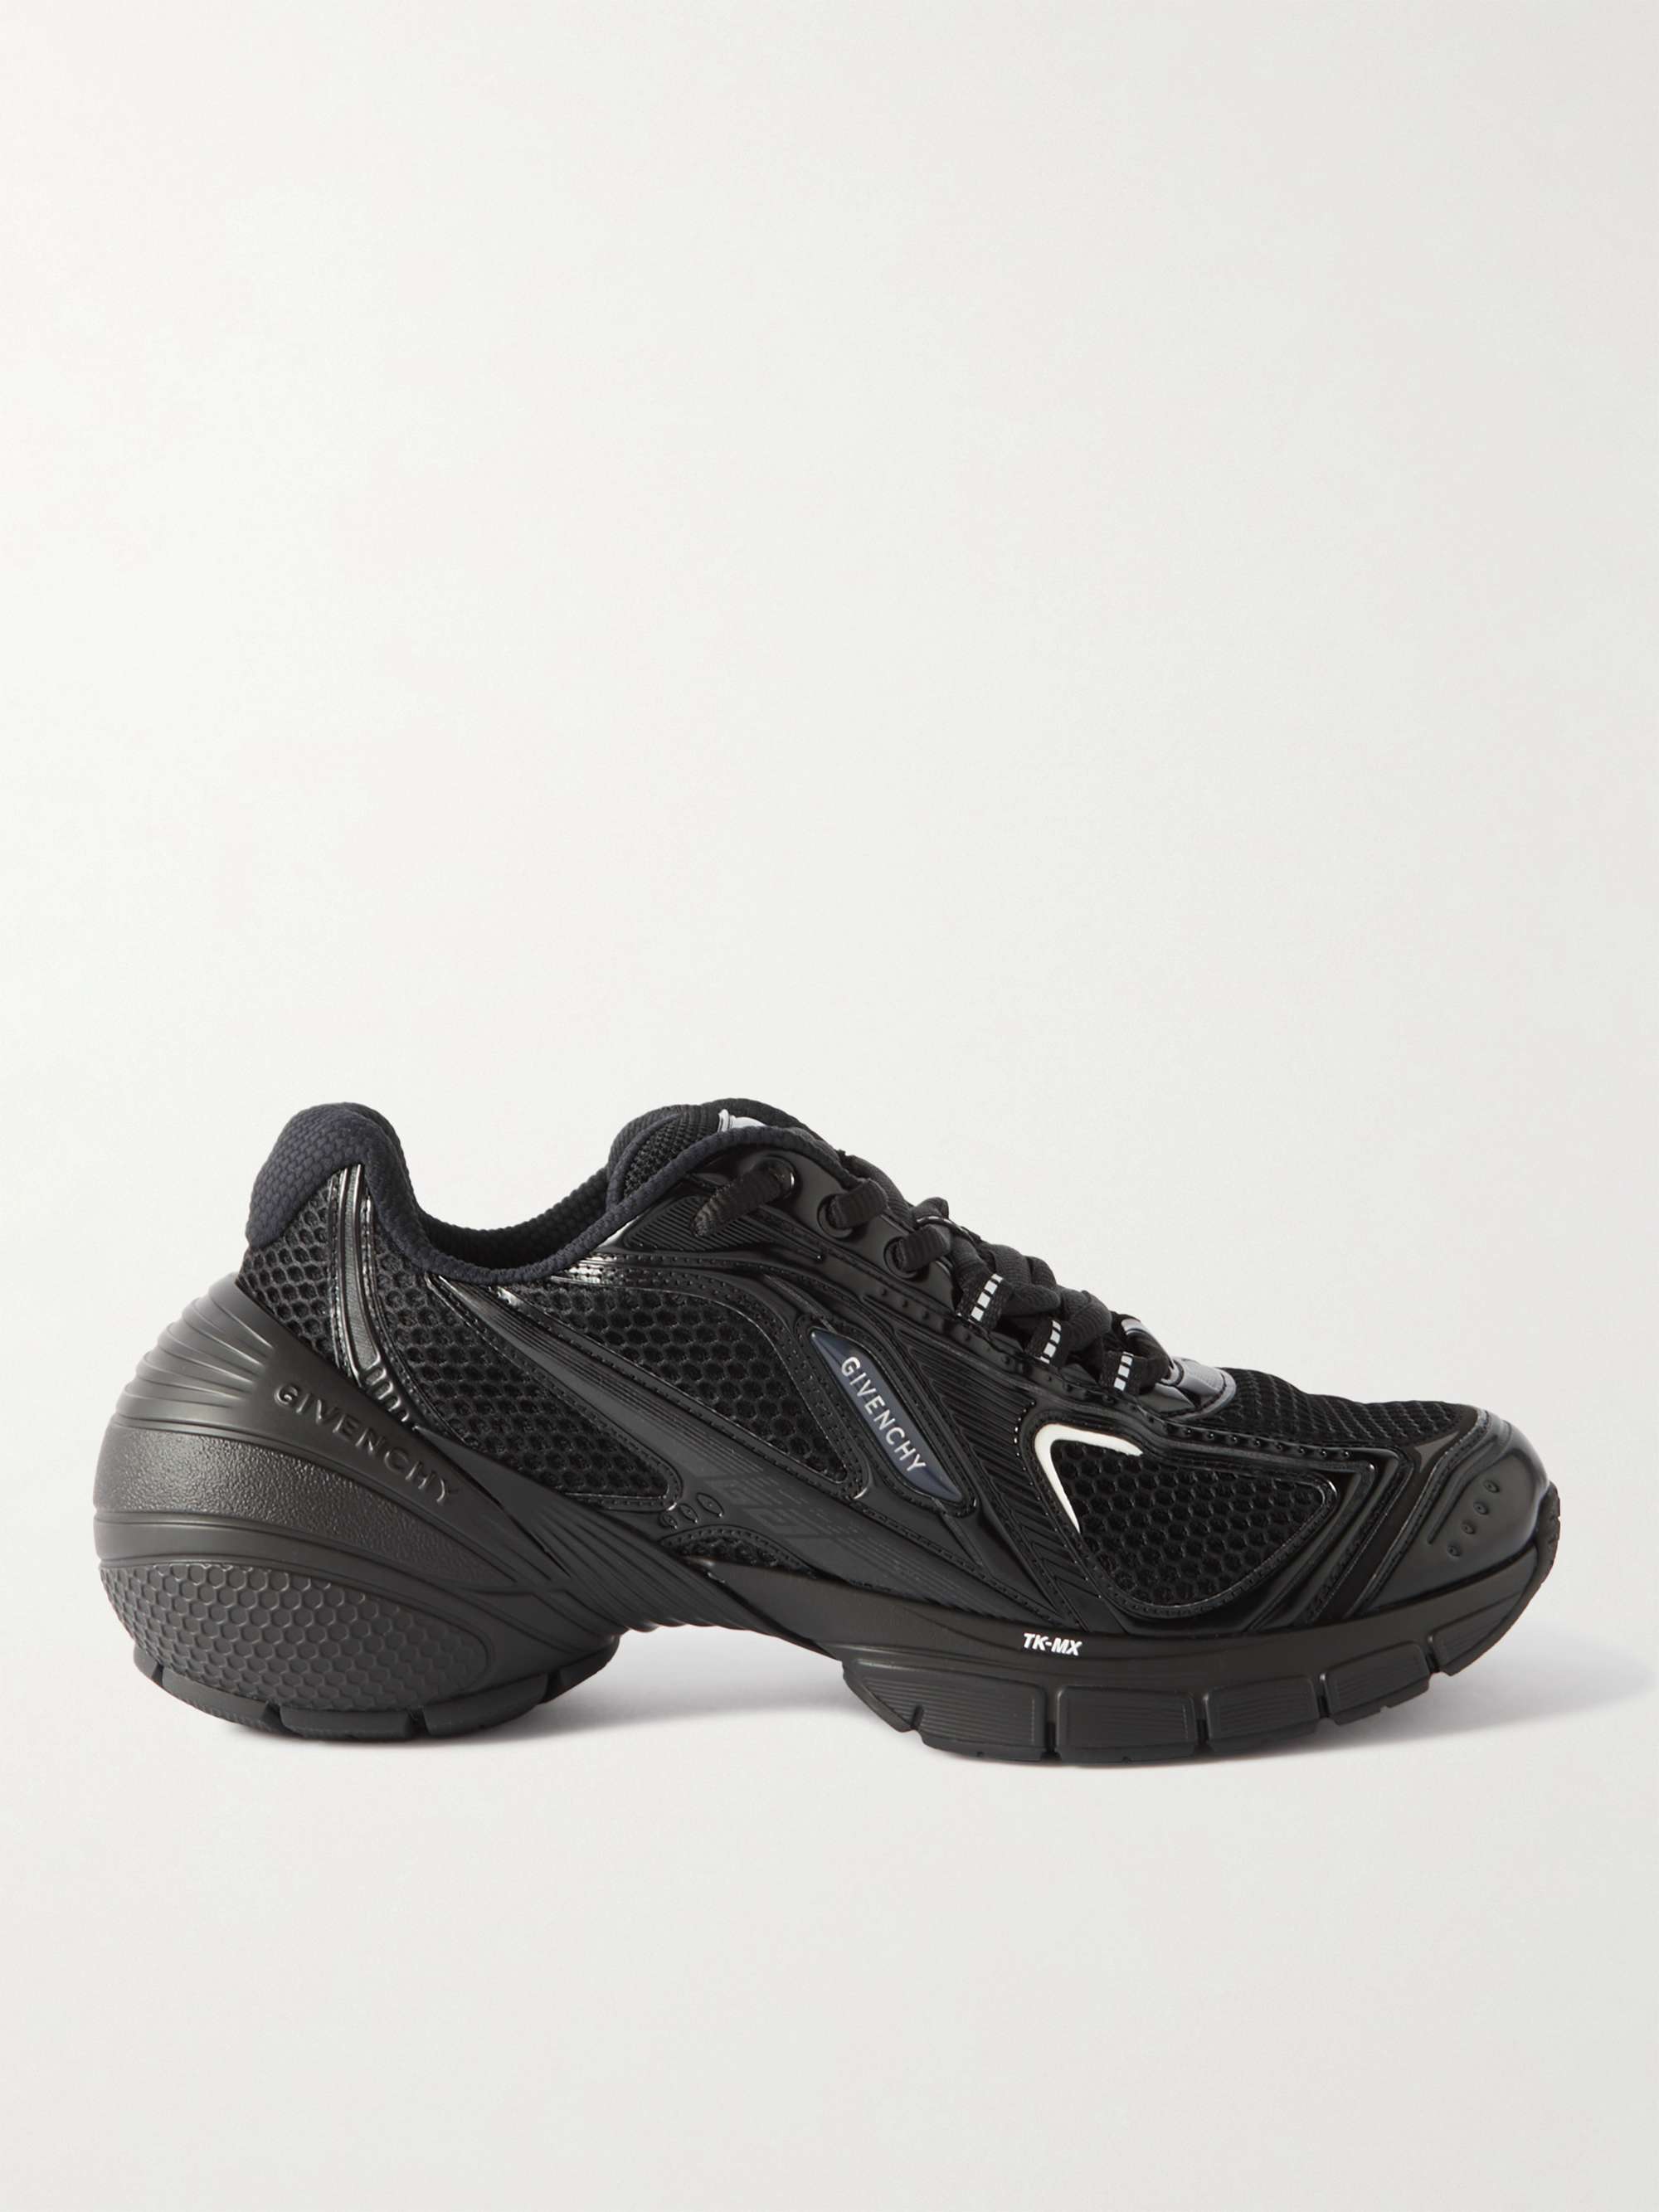 GIVENCHY TK-MX Mesh, Rubber and Faux Leather Sneakers